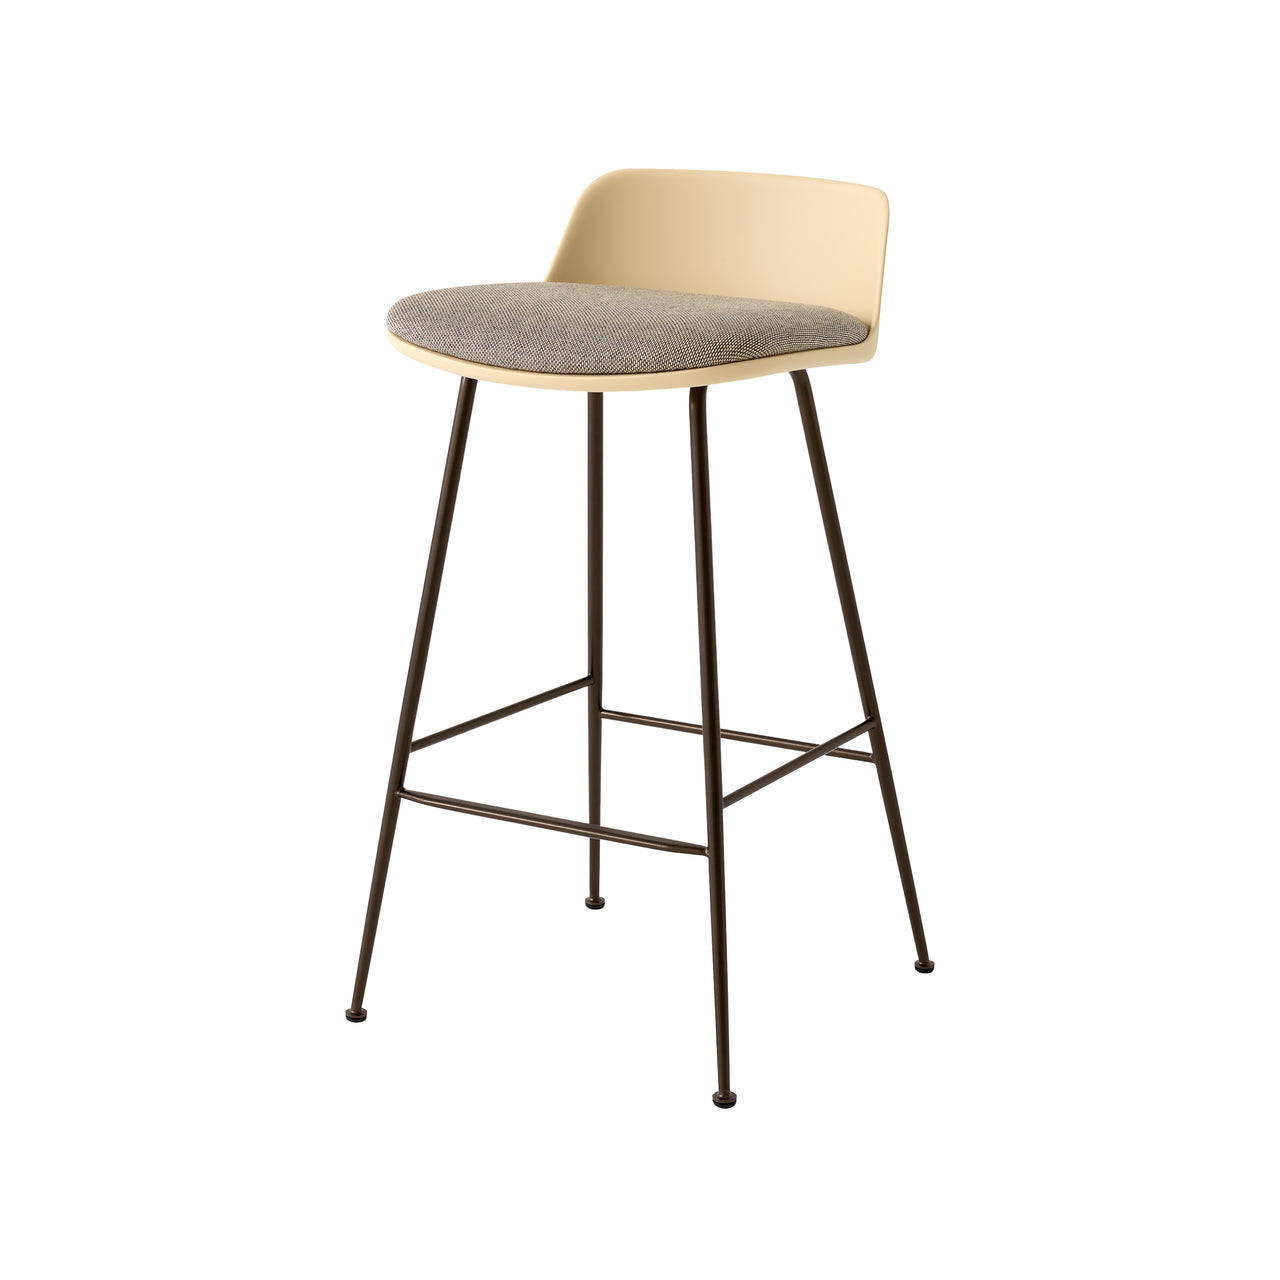 Rely Counter Stool: HW82 + Beige Sand + Bronzed